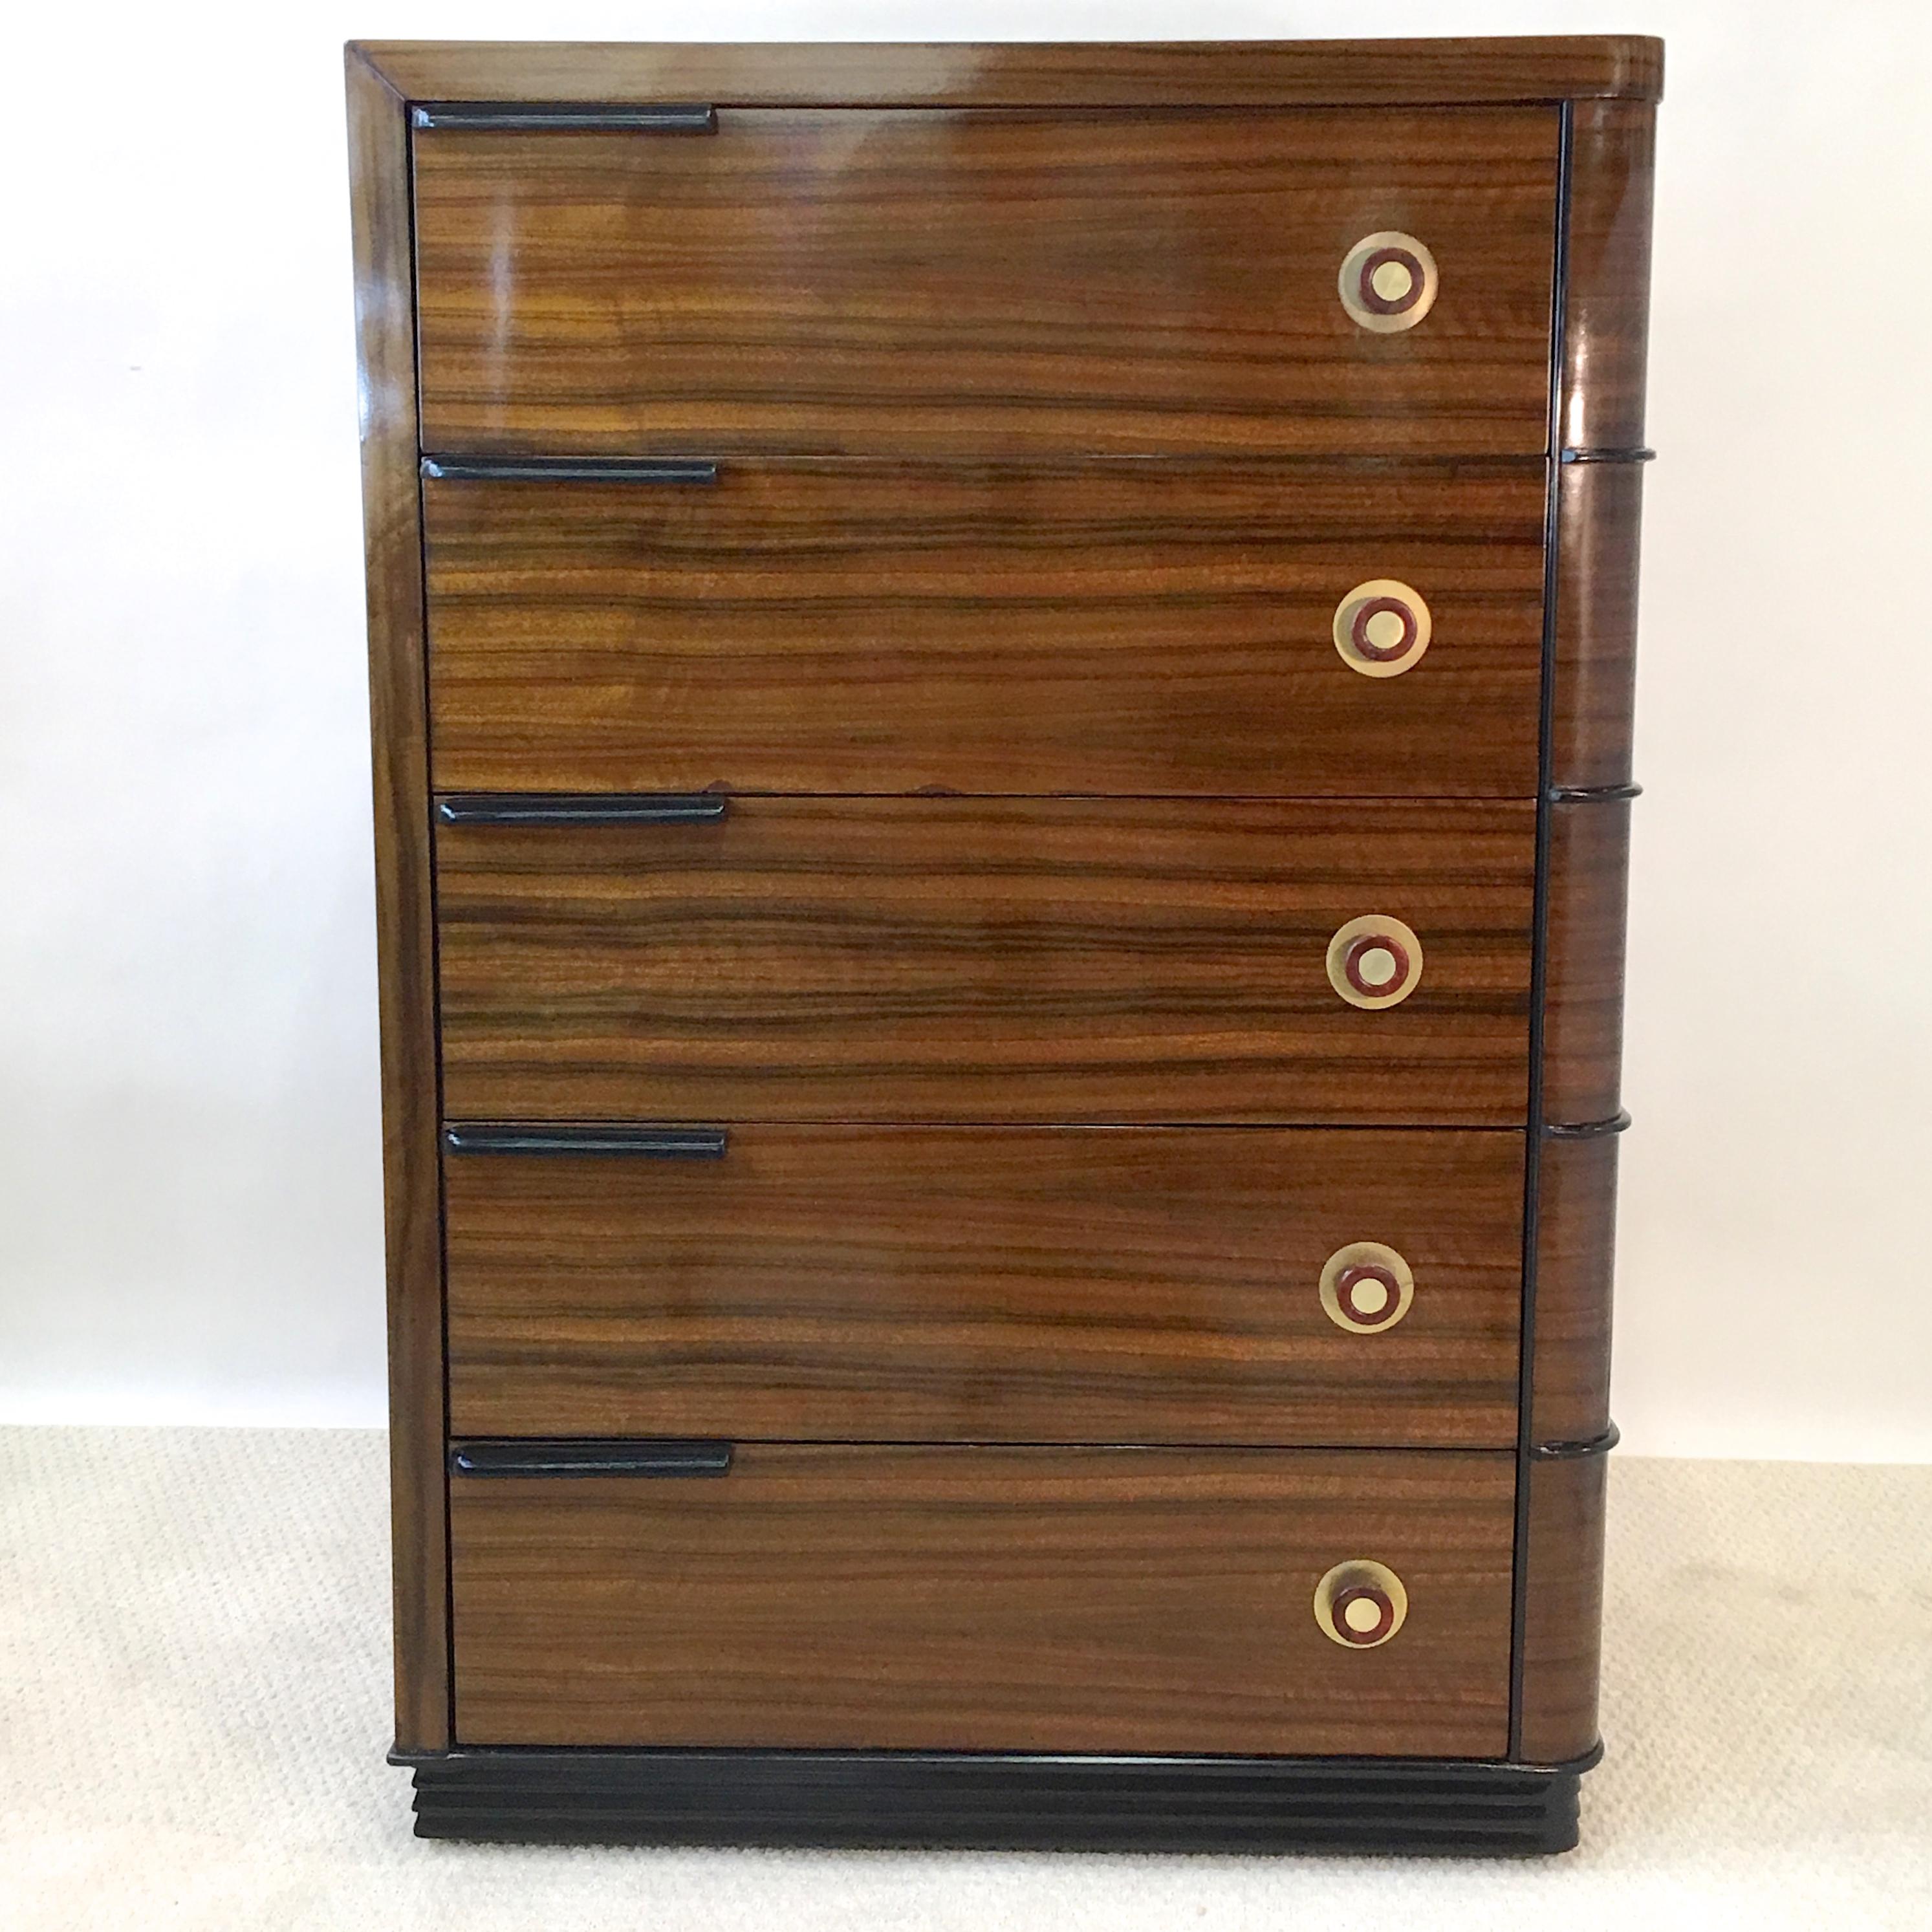 1930s streamline Art Deco beautifully grained walnut five-drawer tall dresser with round brass and bakelite drawer pulls and ebonized horizontal stylings, in the manner of Gilbert Rohde and Donald Deskey.

Beautifully restored in high gloss